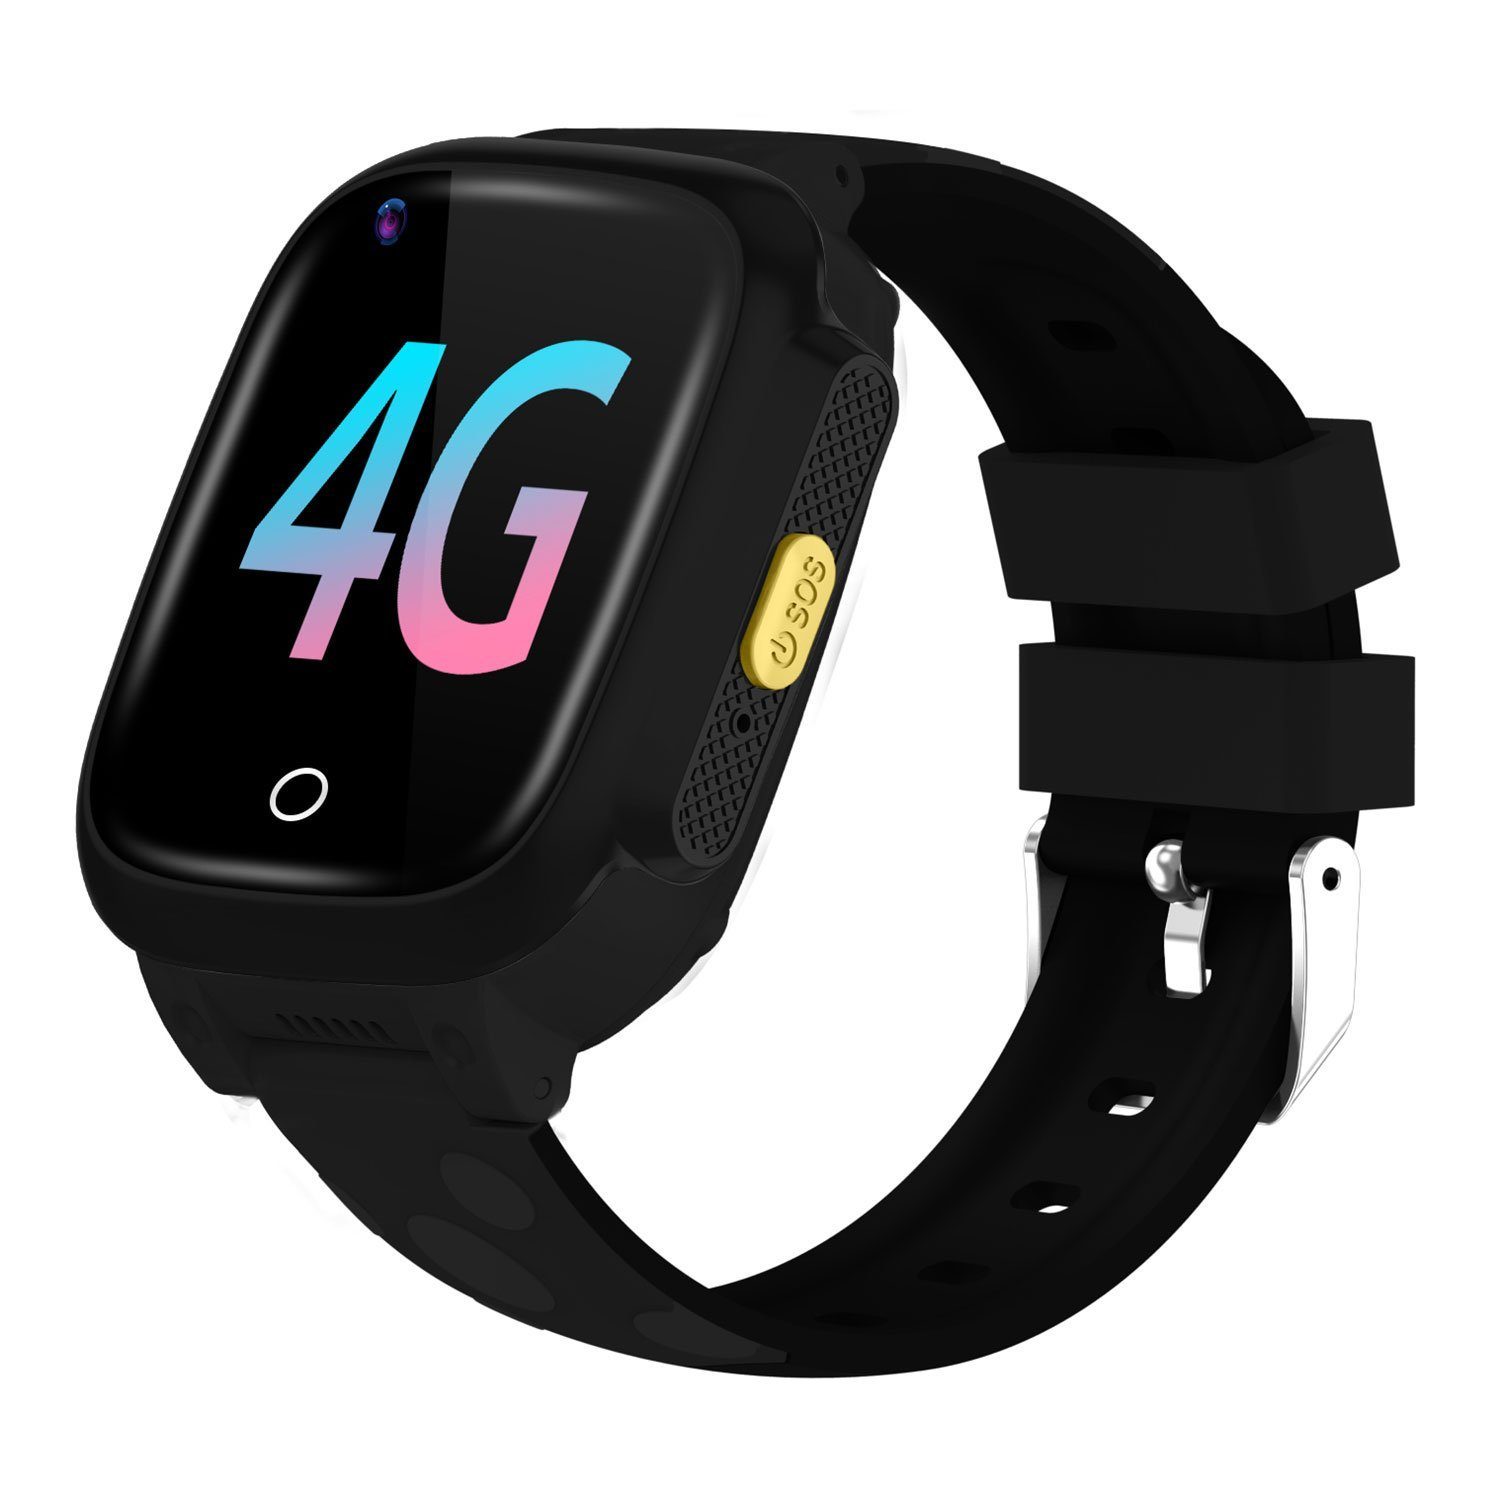 Kidocall - 4G Smartwatch, Phone & GPS tracking for Kids - Black